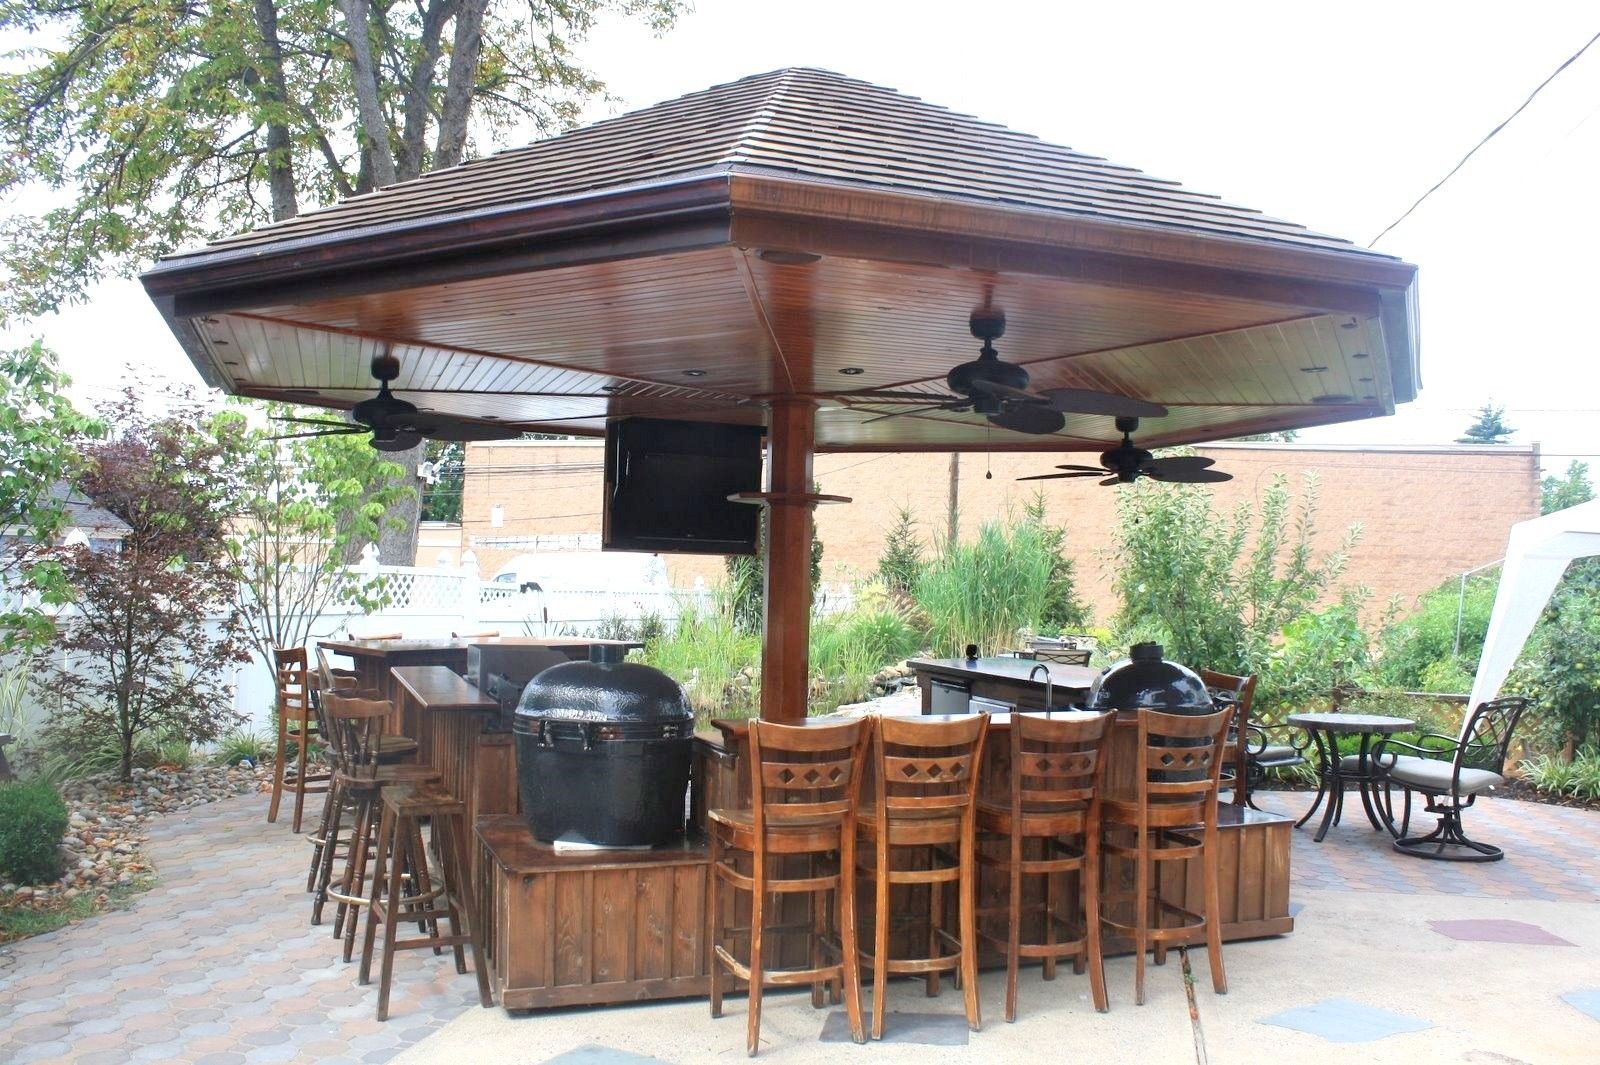 Handmade Primo Grill Outdoor Kitchen And Bar by Deck Kitchen  CustomMade.com